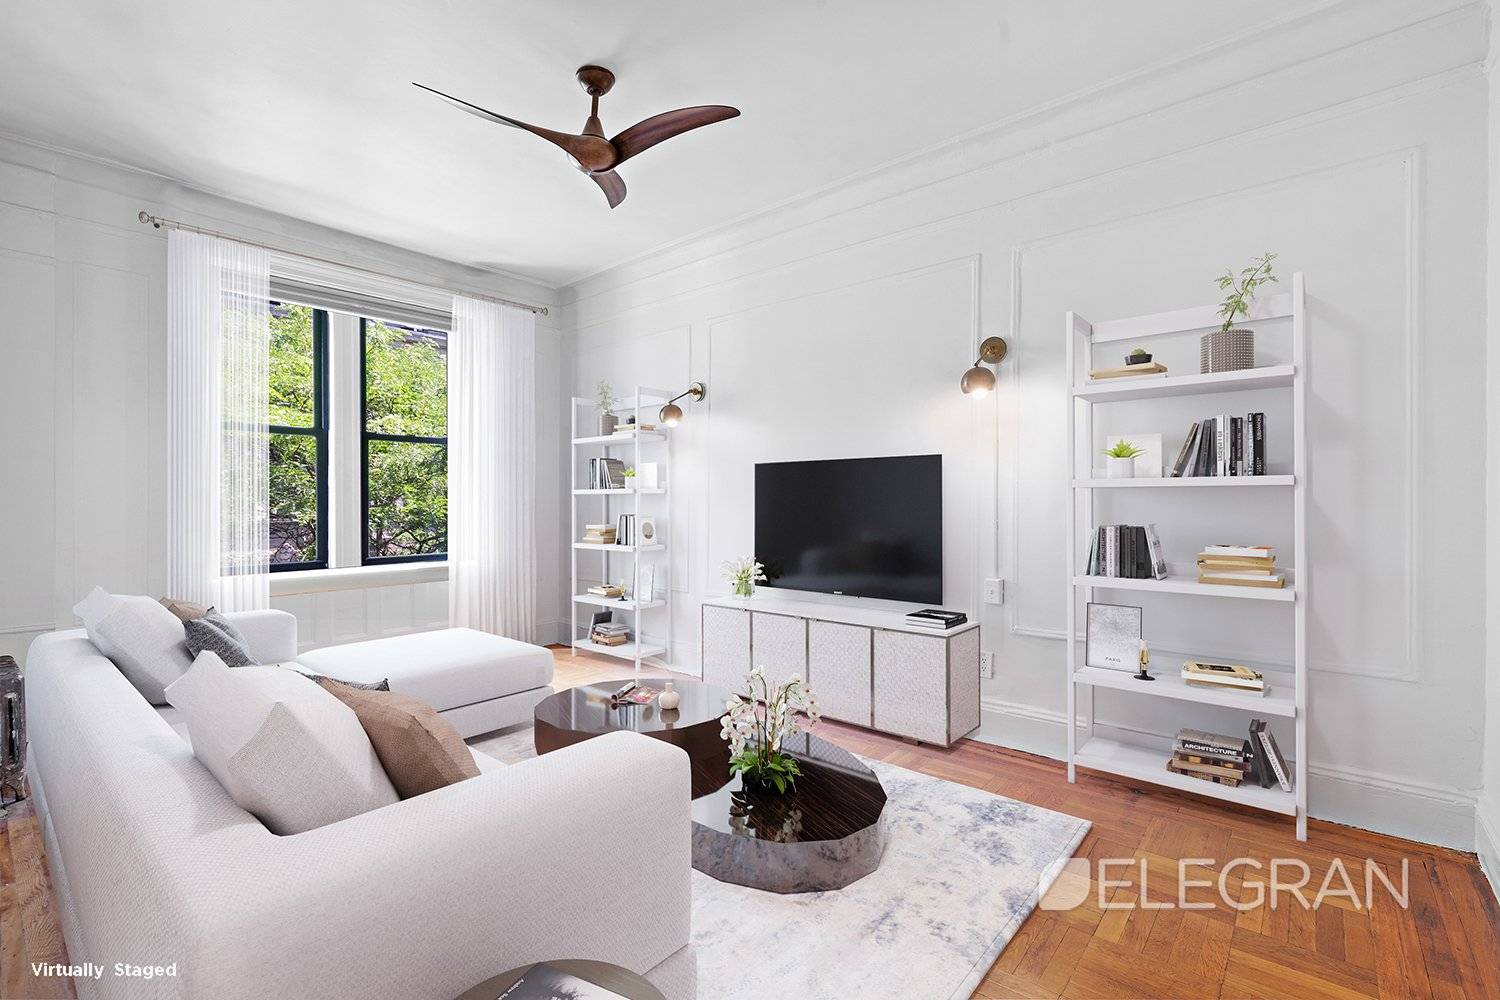 Located on a picturesque tree lined street in Manhattan, this charming home is filled with natural light and prewar character.